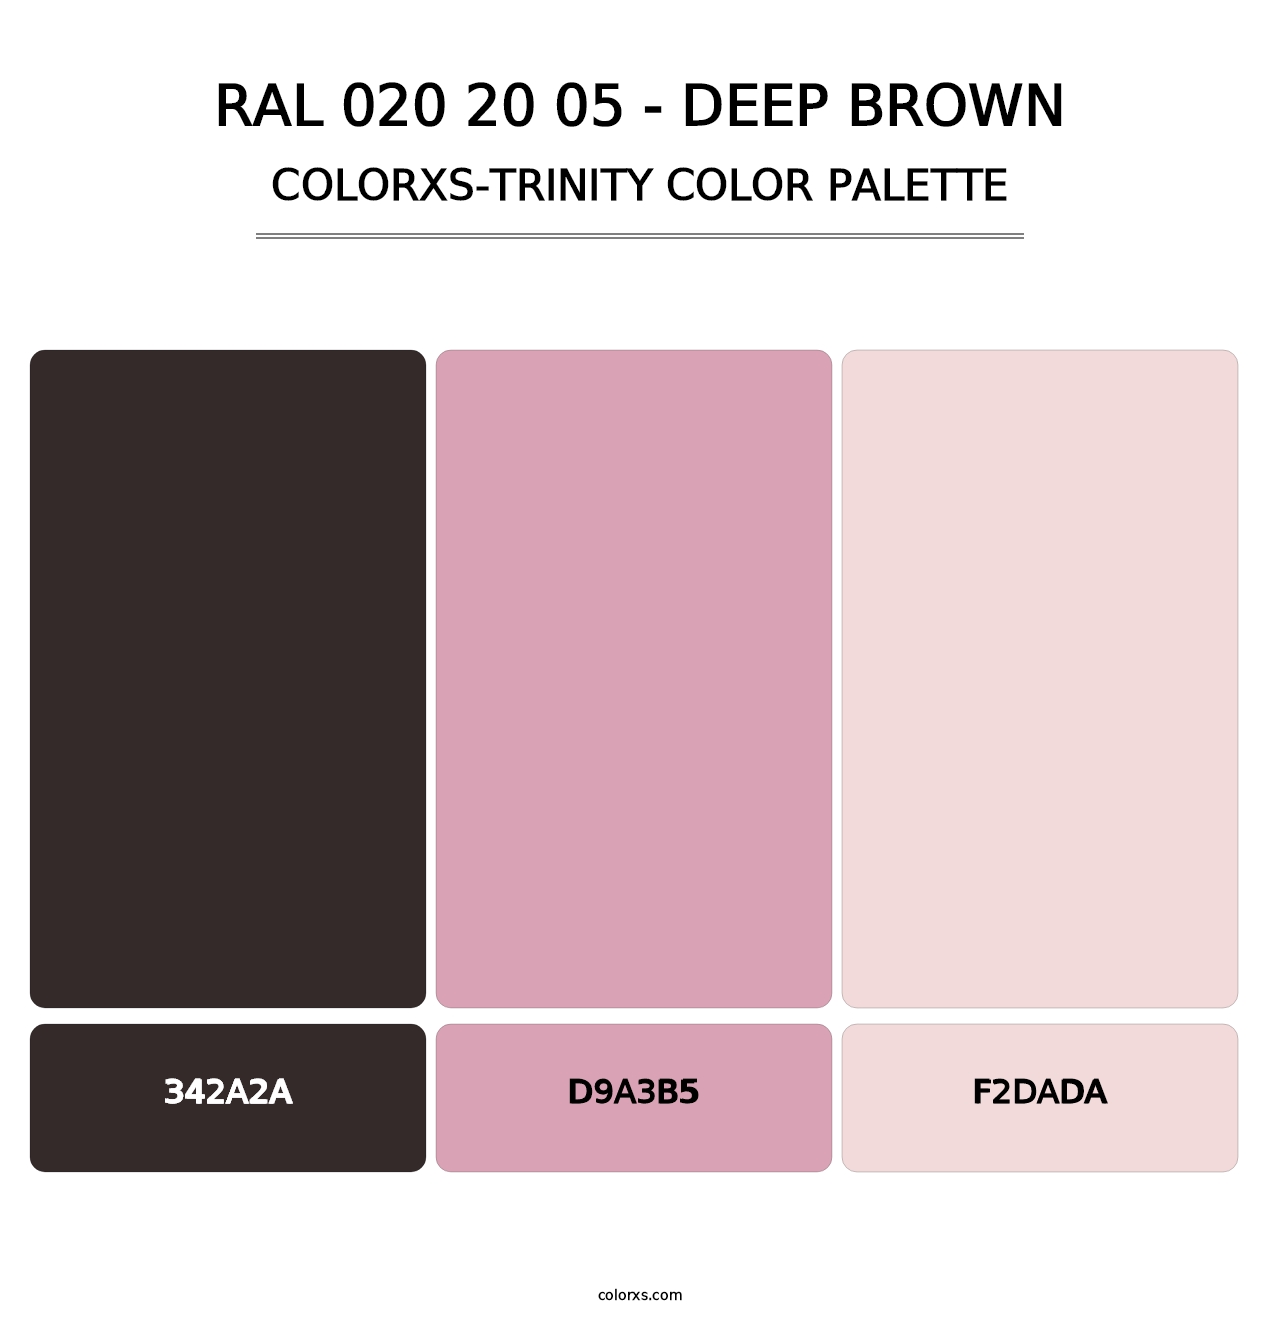 RAL 020 20 05 - Deep Brown - Colorxs Trinity Palette